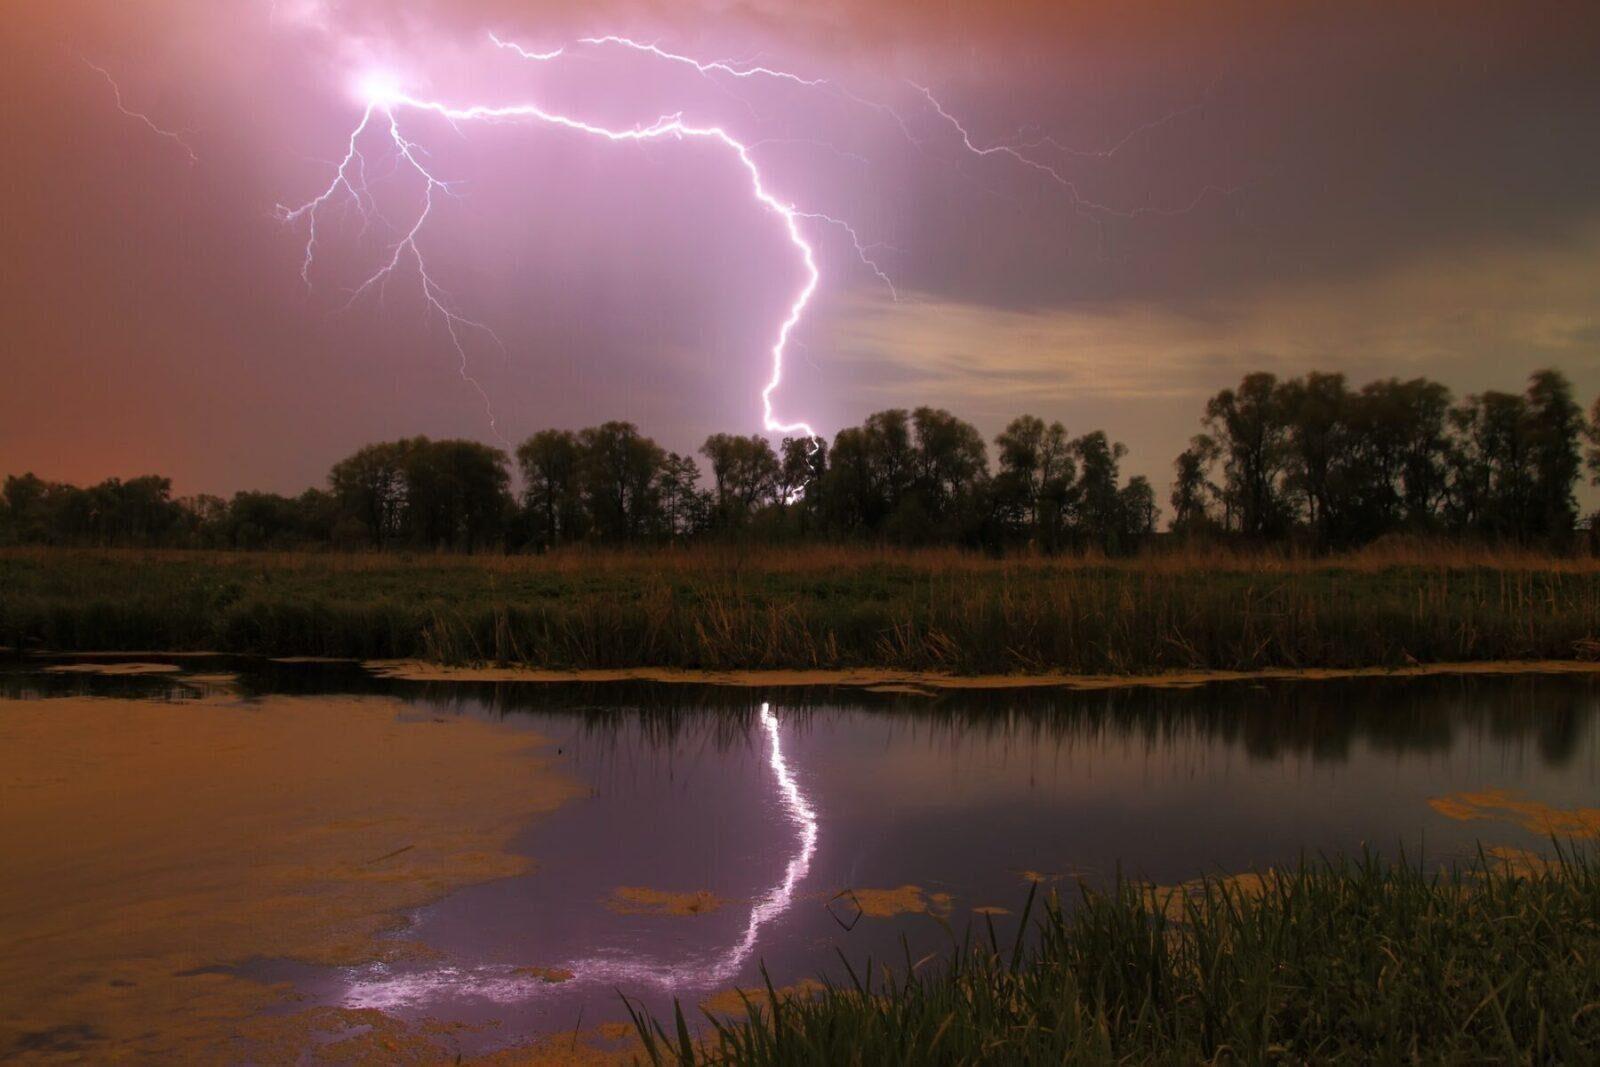 Thunderstorm on the river